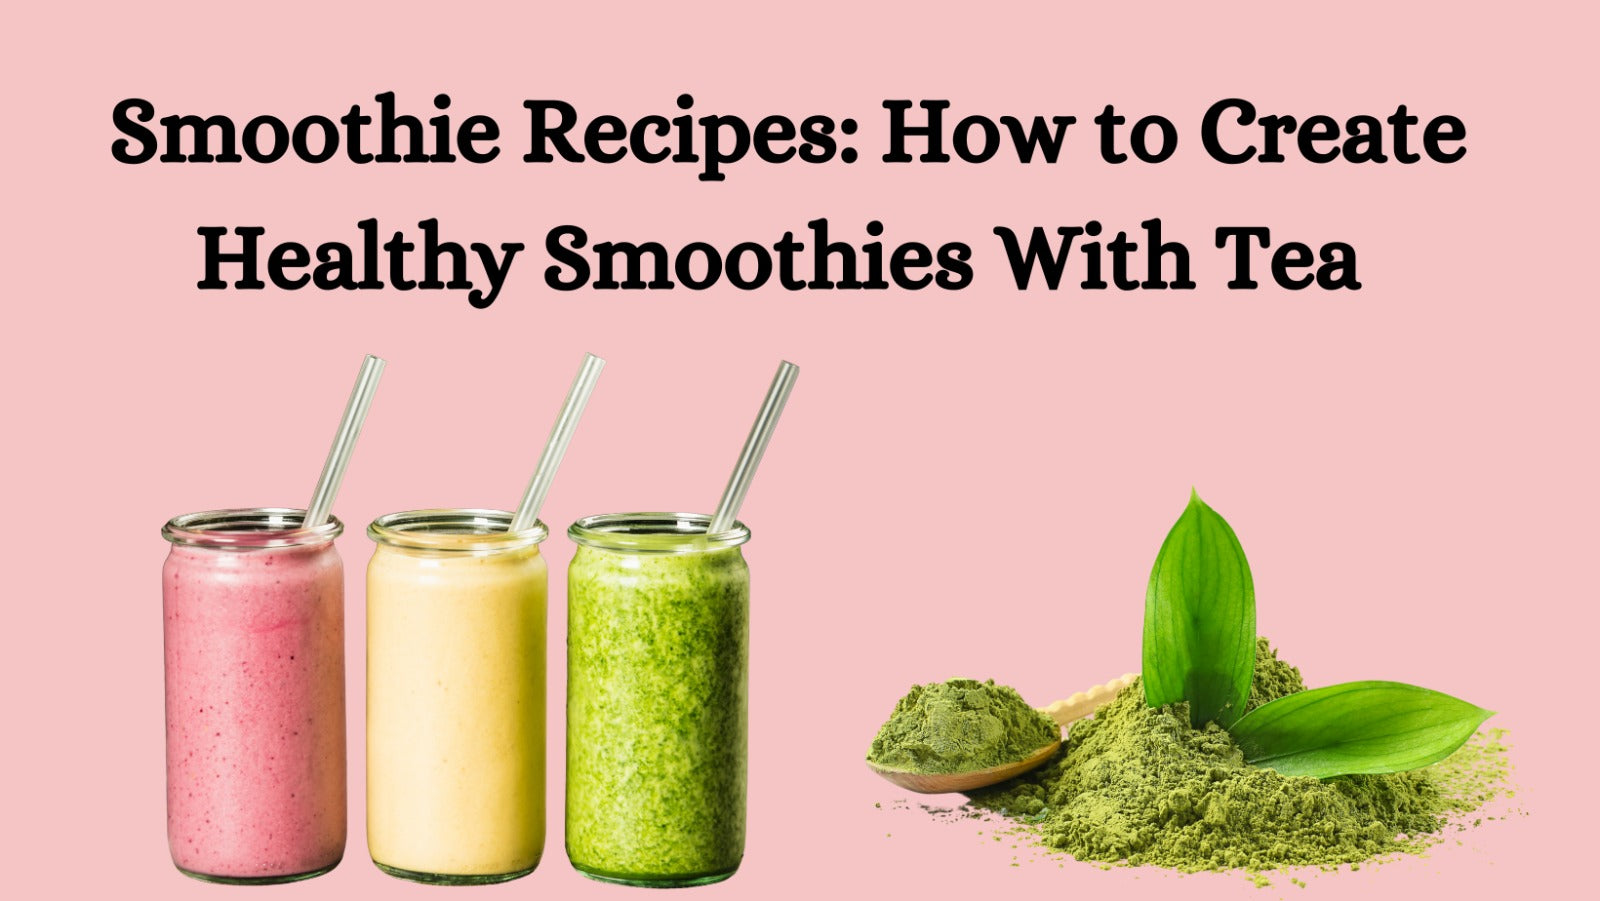 Smoothie Recipes: How to Create Healthy Smoothies With Tea